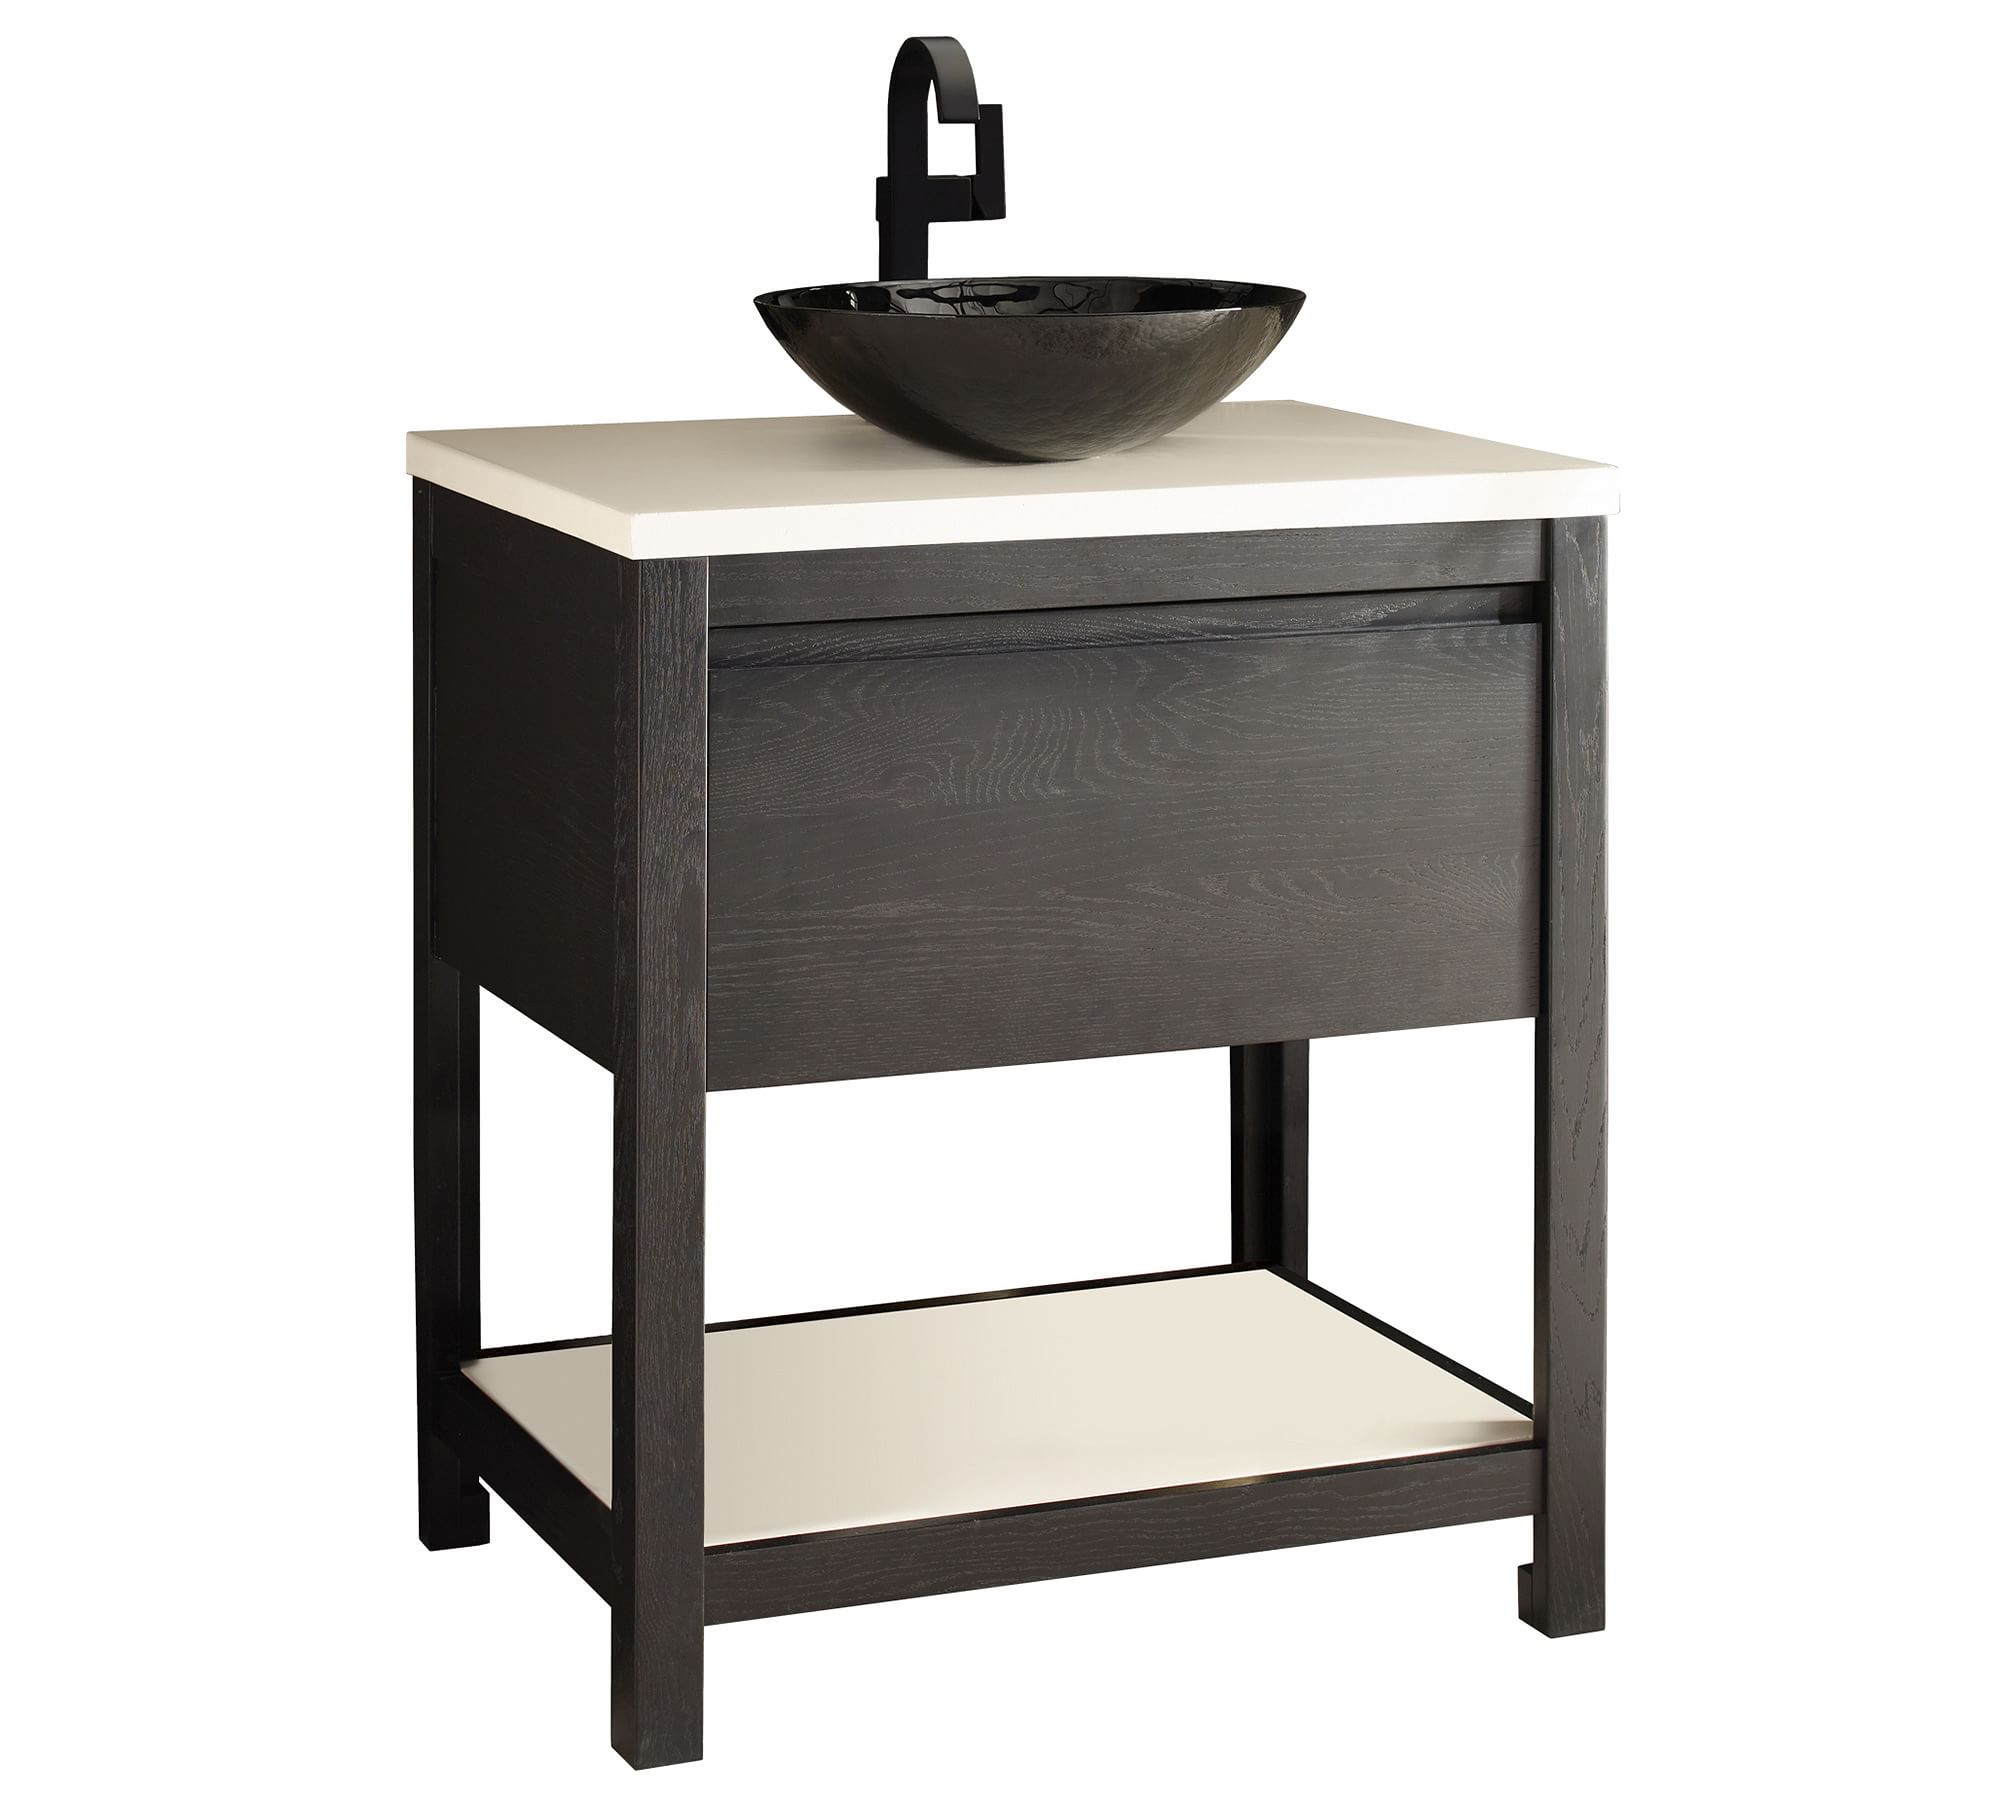 Rilen Sunrise 30” Handcrafted Single Vanity with Glass Sink